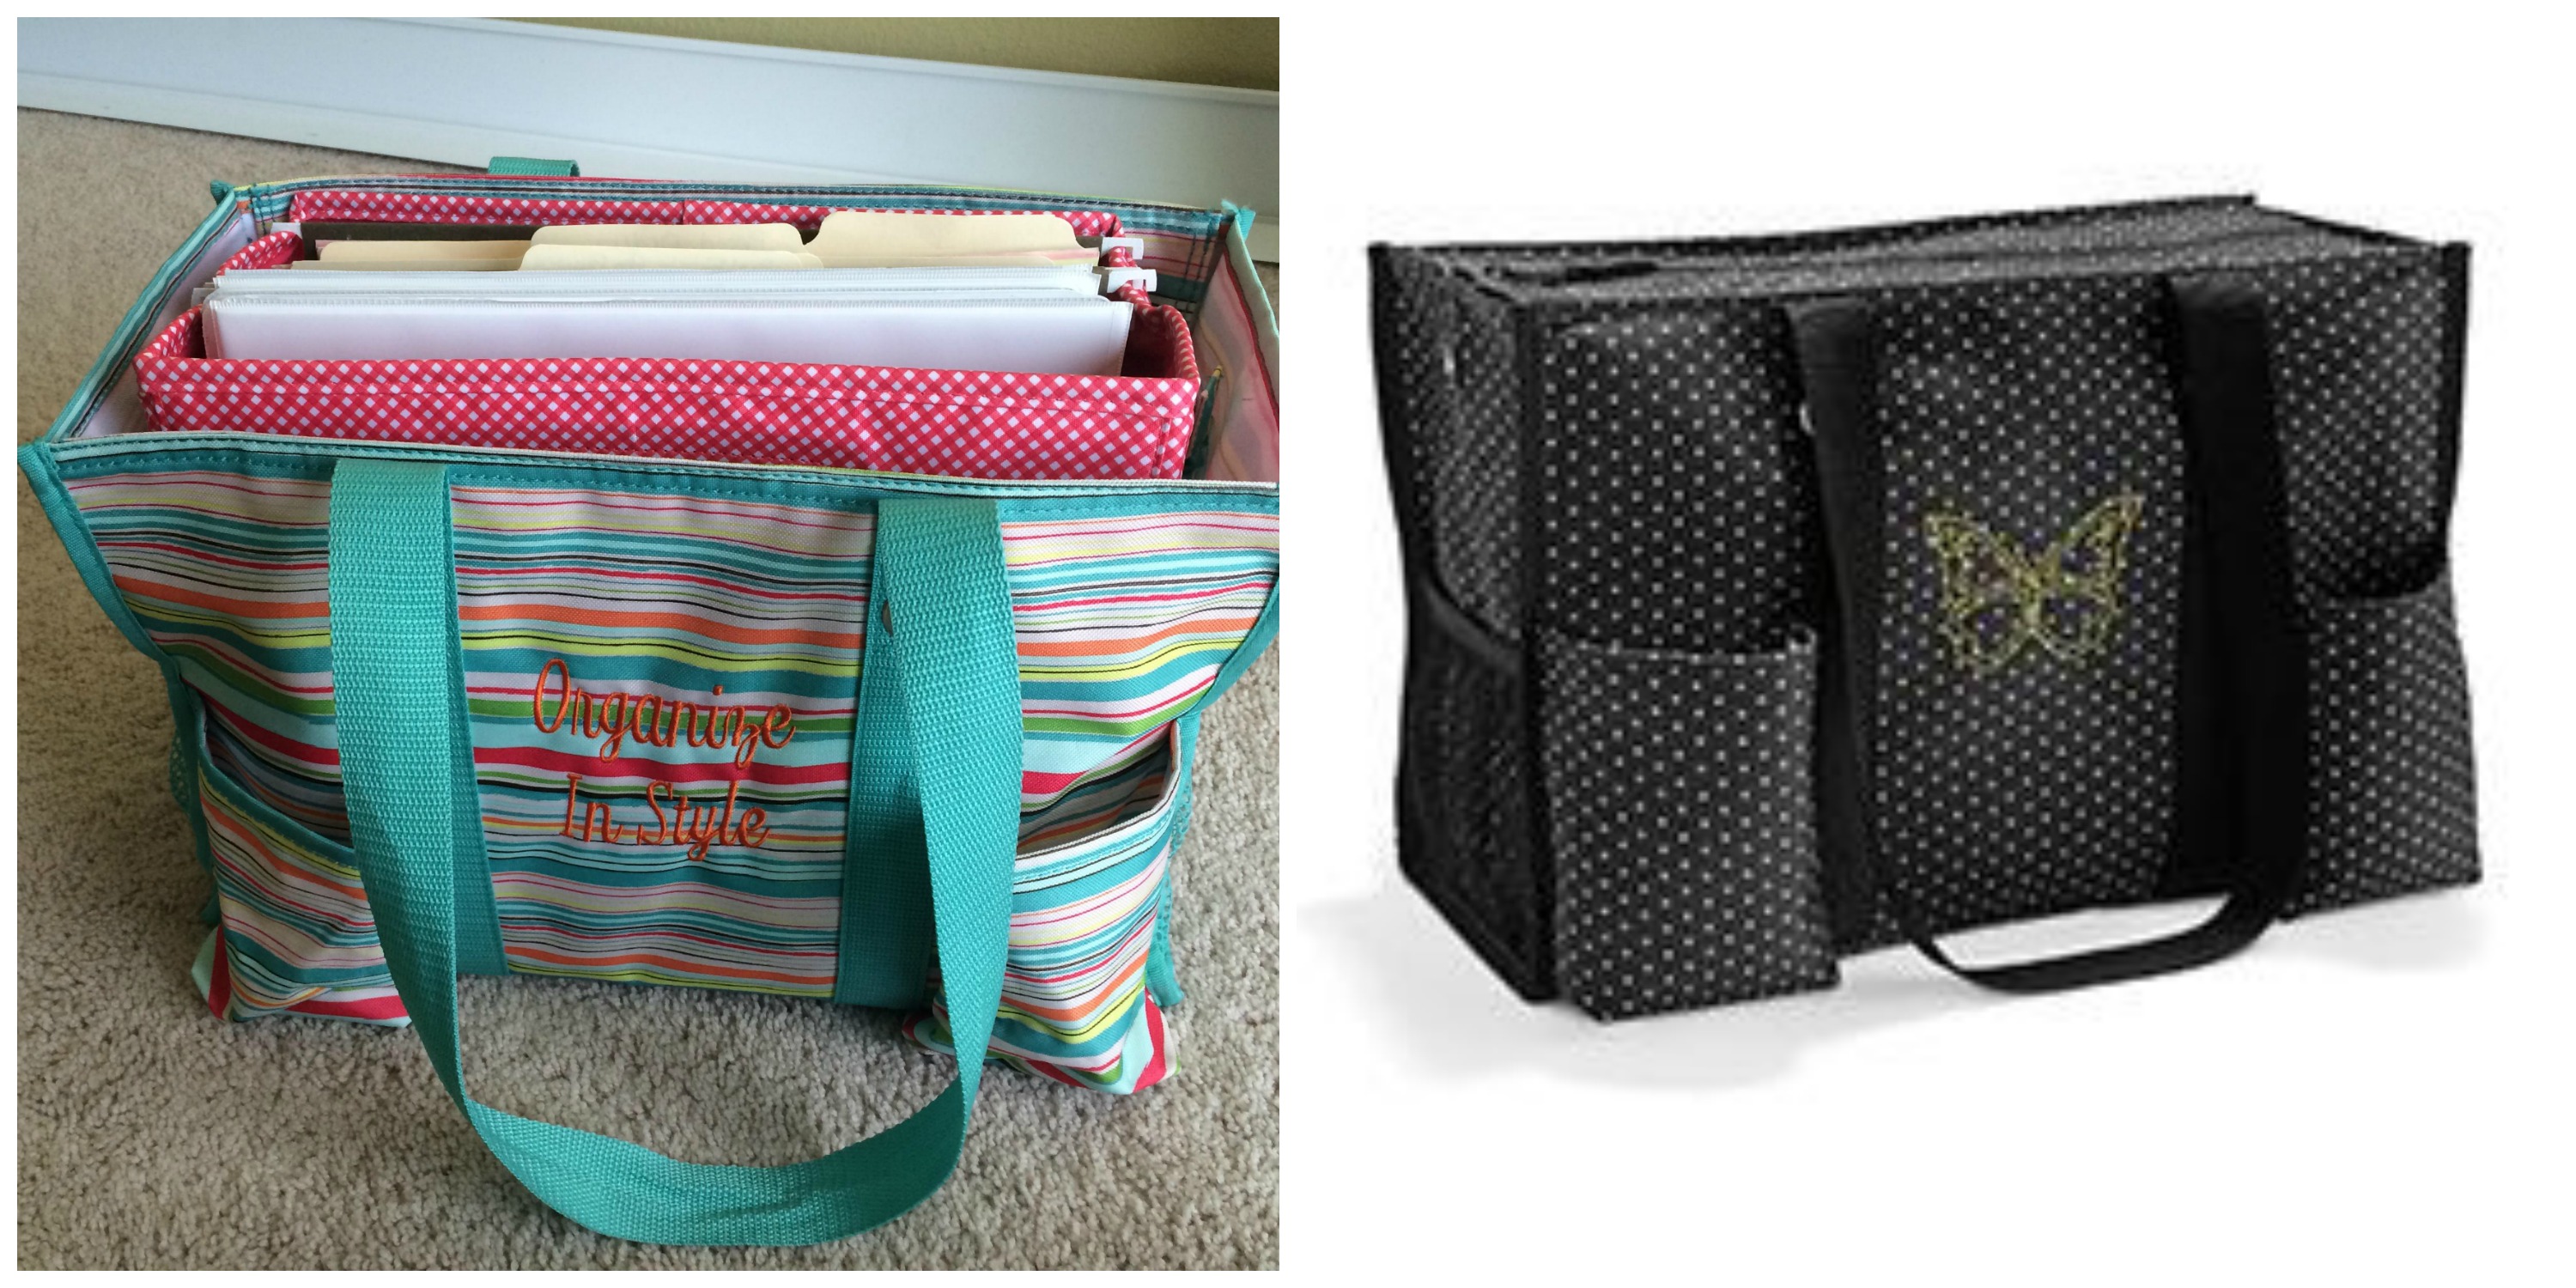 Thirty one  Thirty one gifts, Thirty one organization, Thirty one